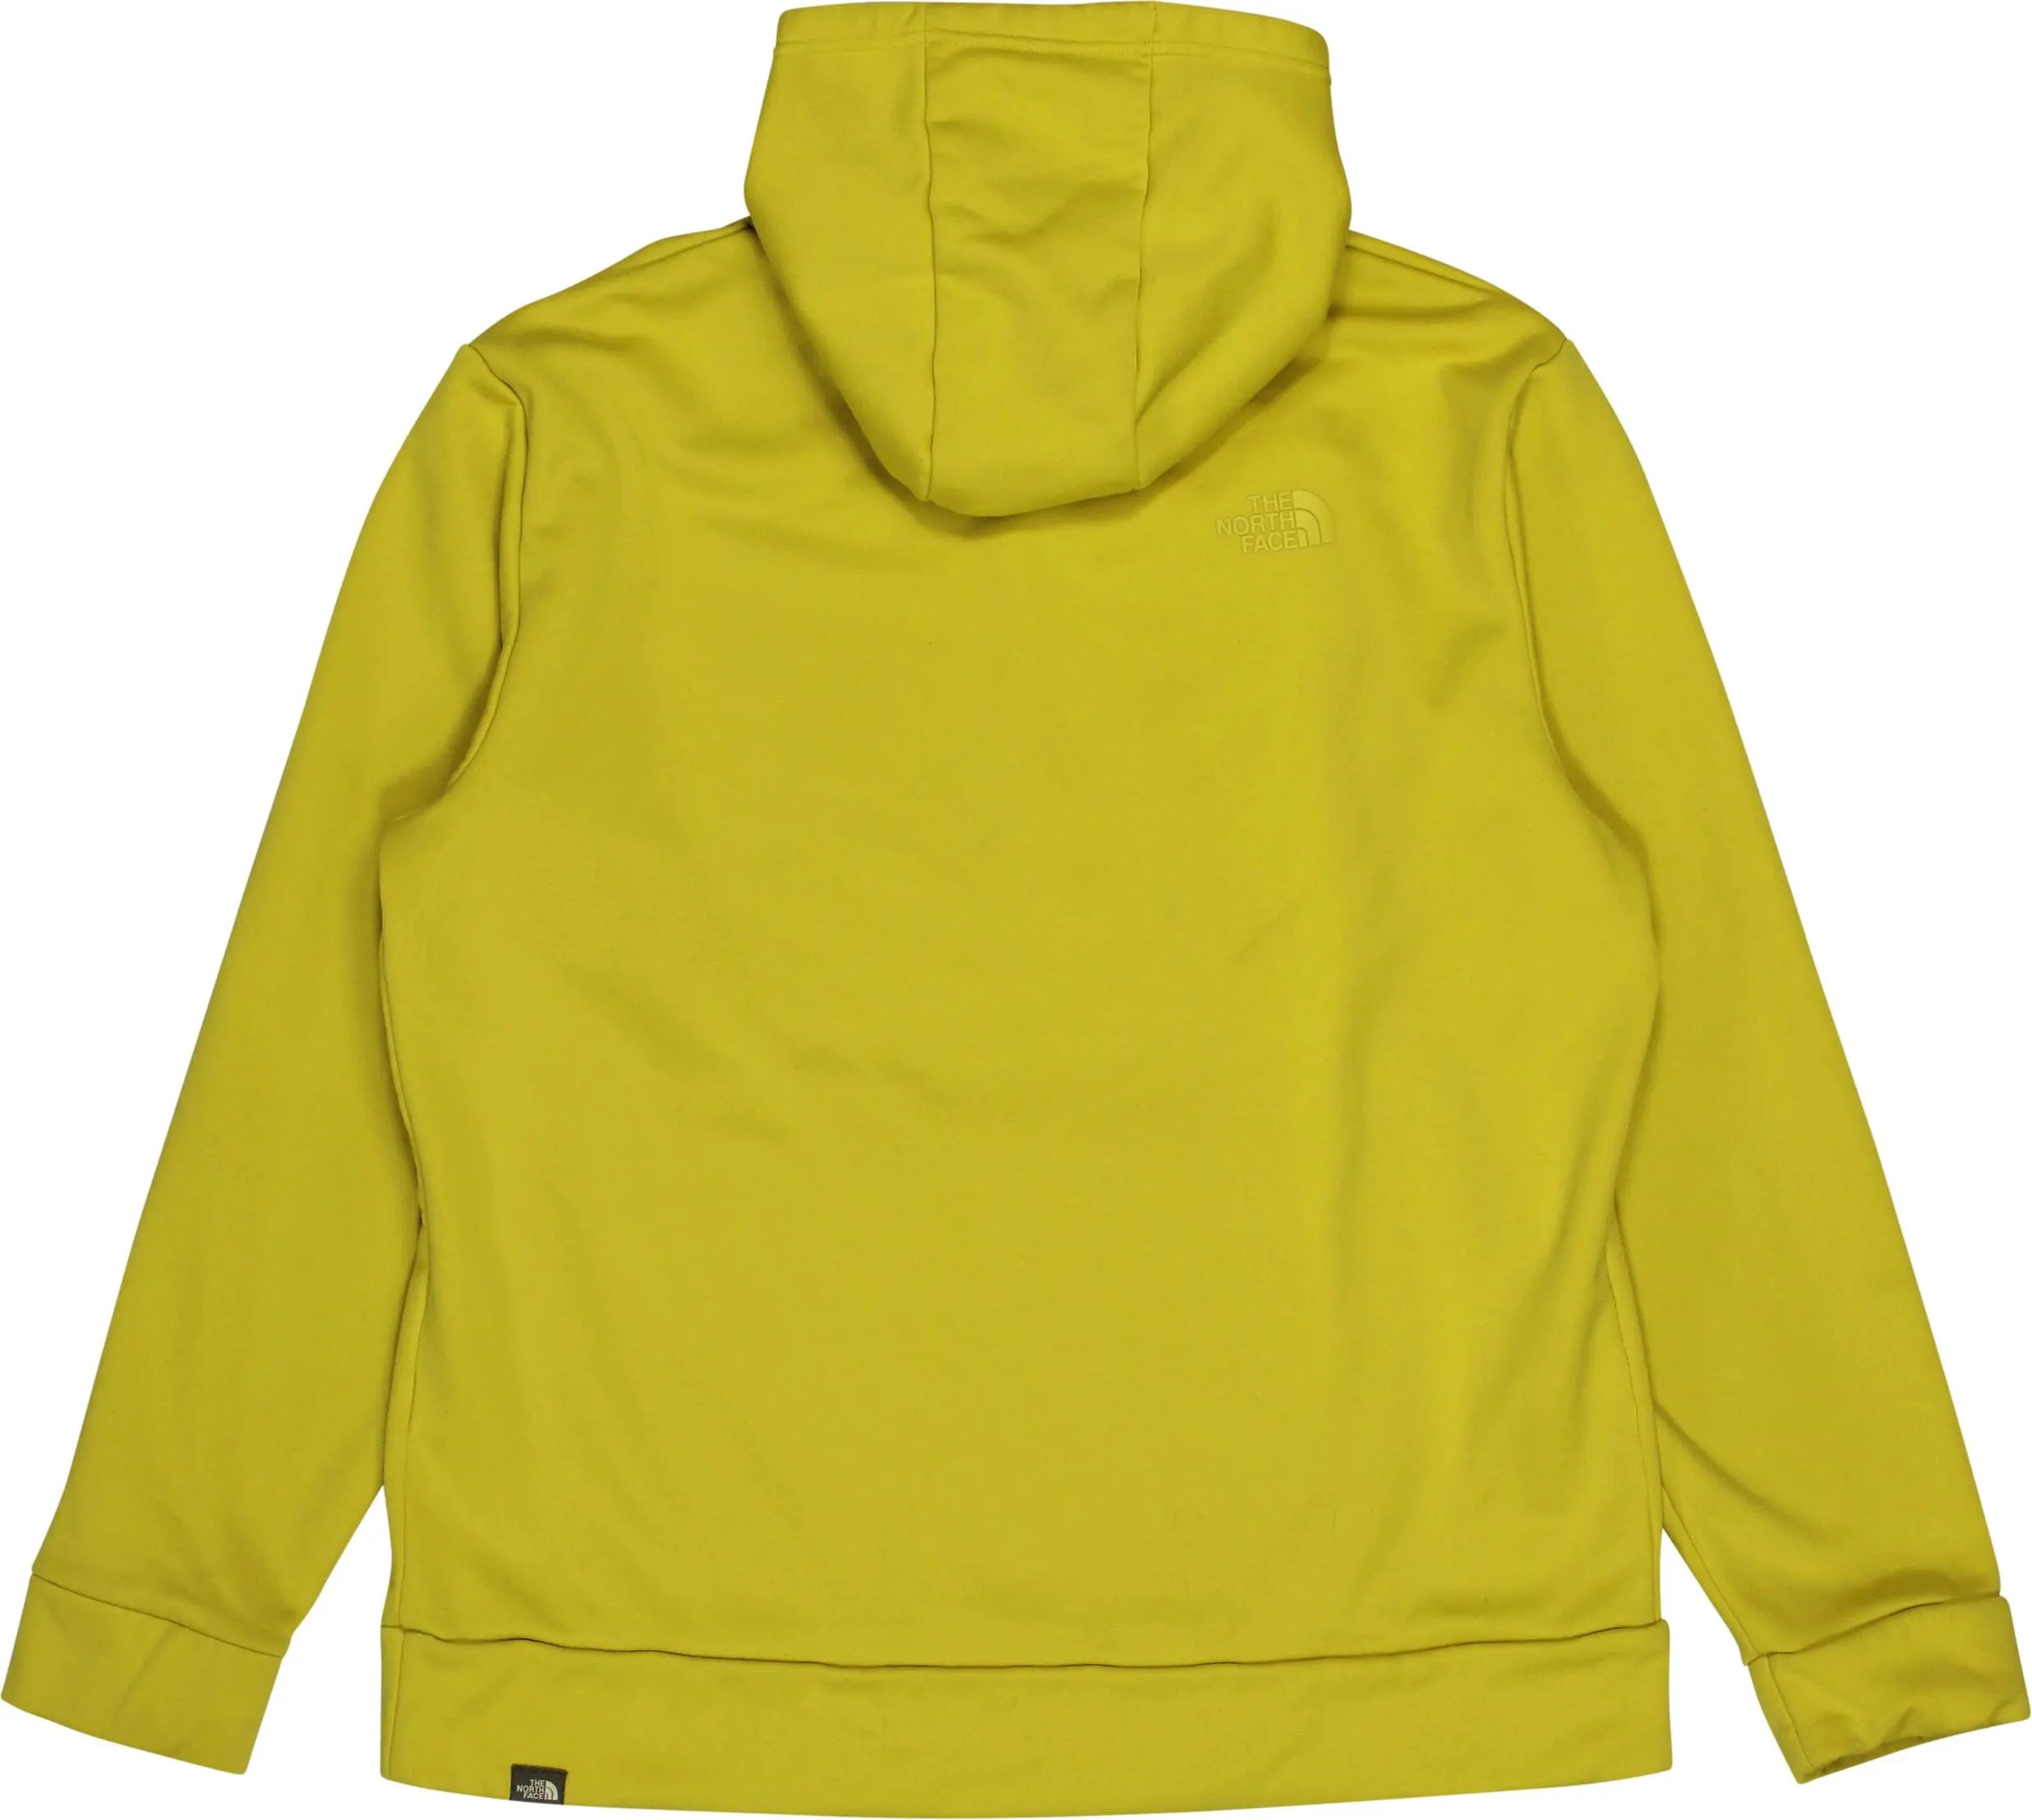 The North Face - Yellow Hoodie by The North Face- ThriftTale.com - Vintage and second handclothing